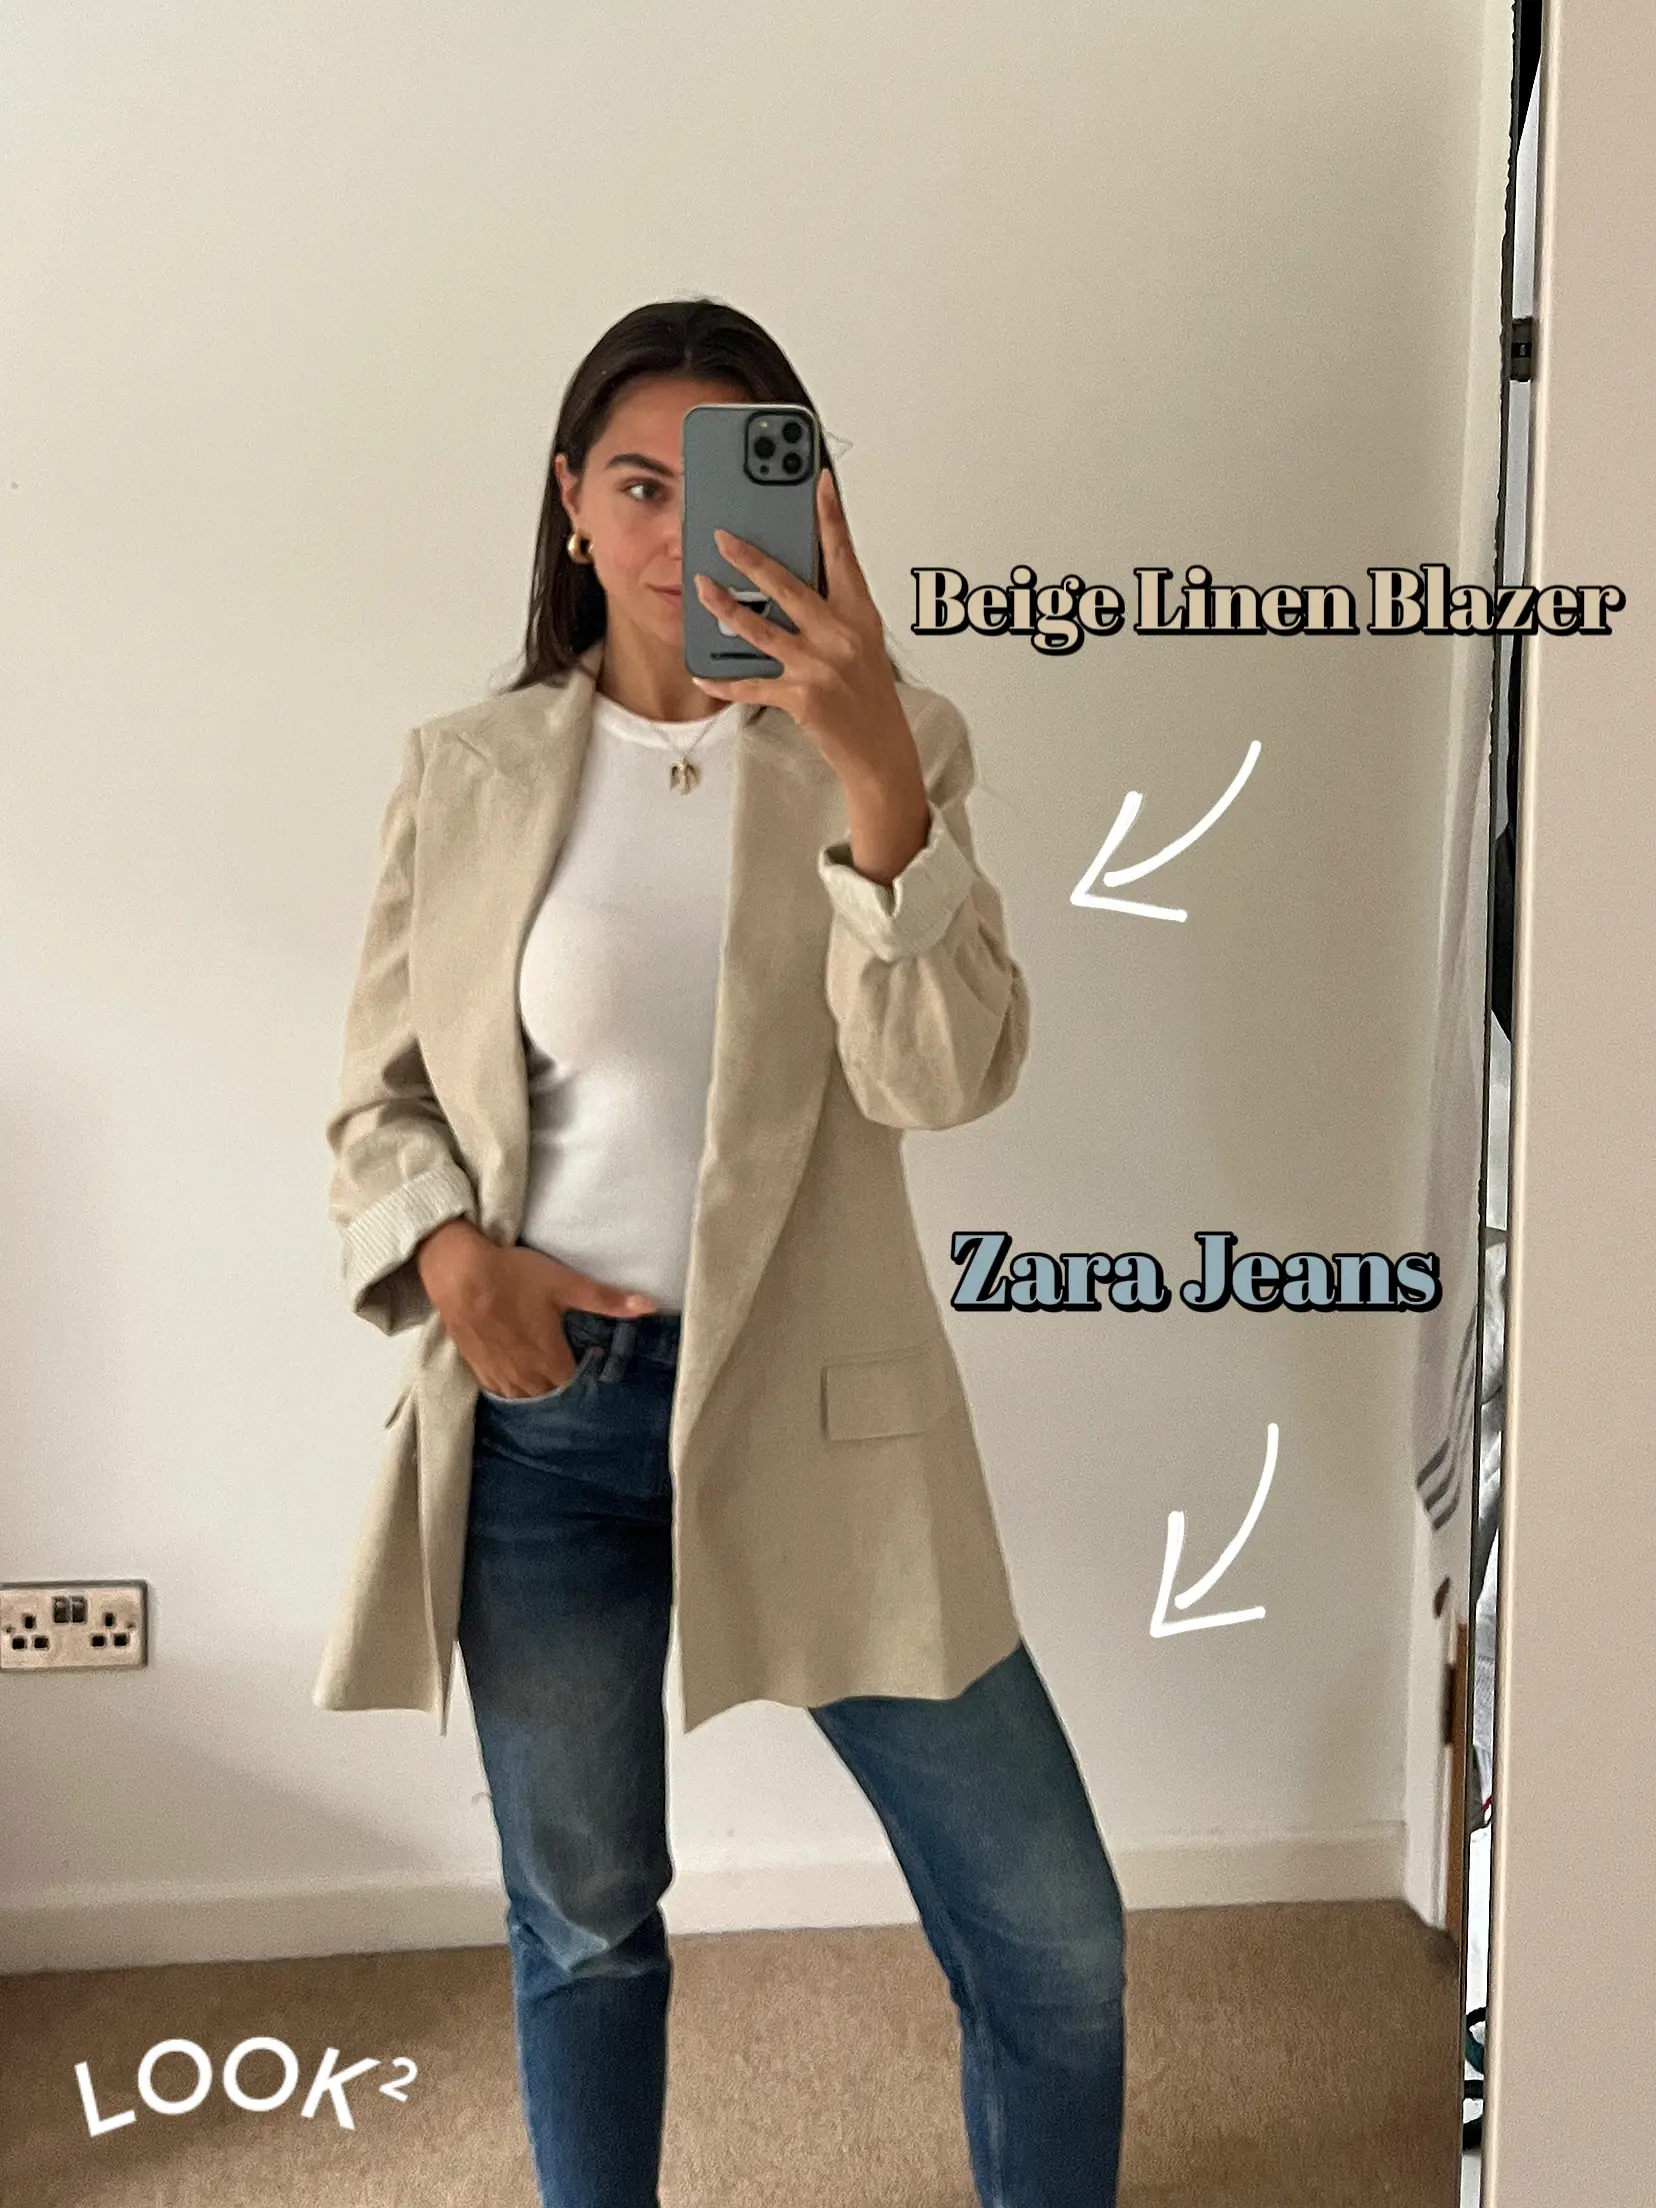 Linen Blazer and Jeans Outfit - Jeans and a Teacup